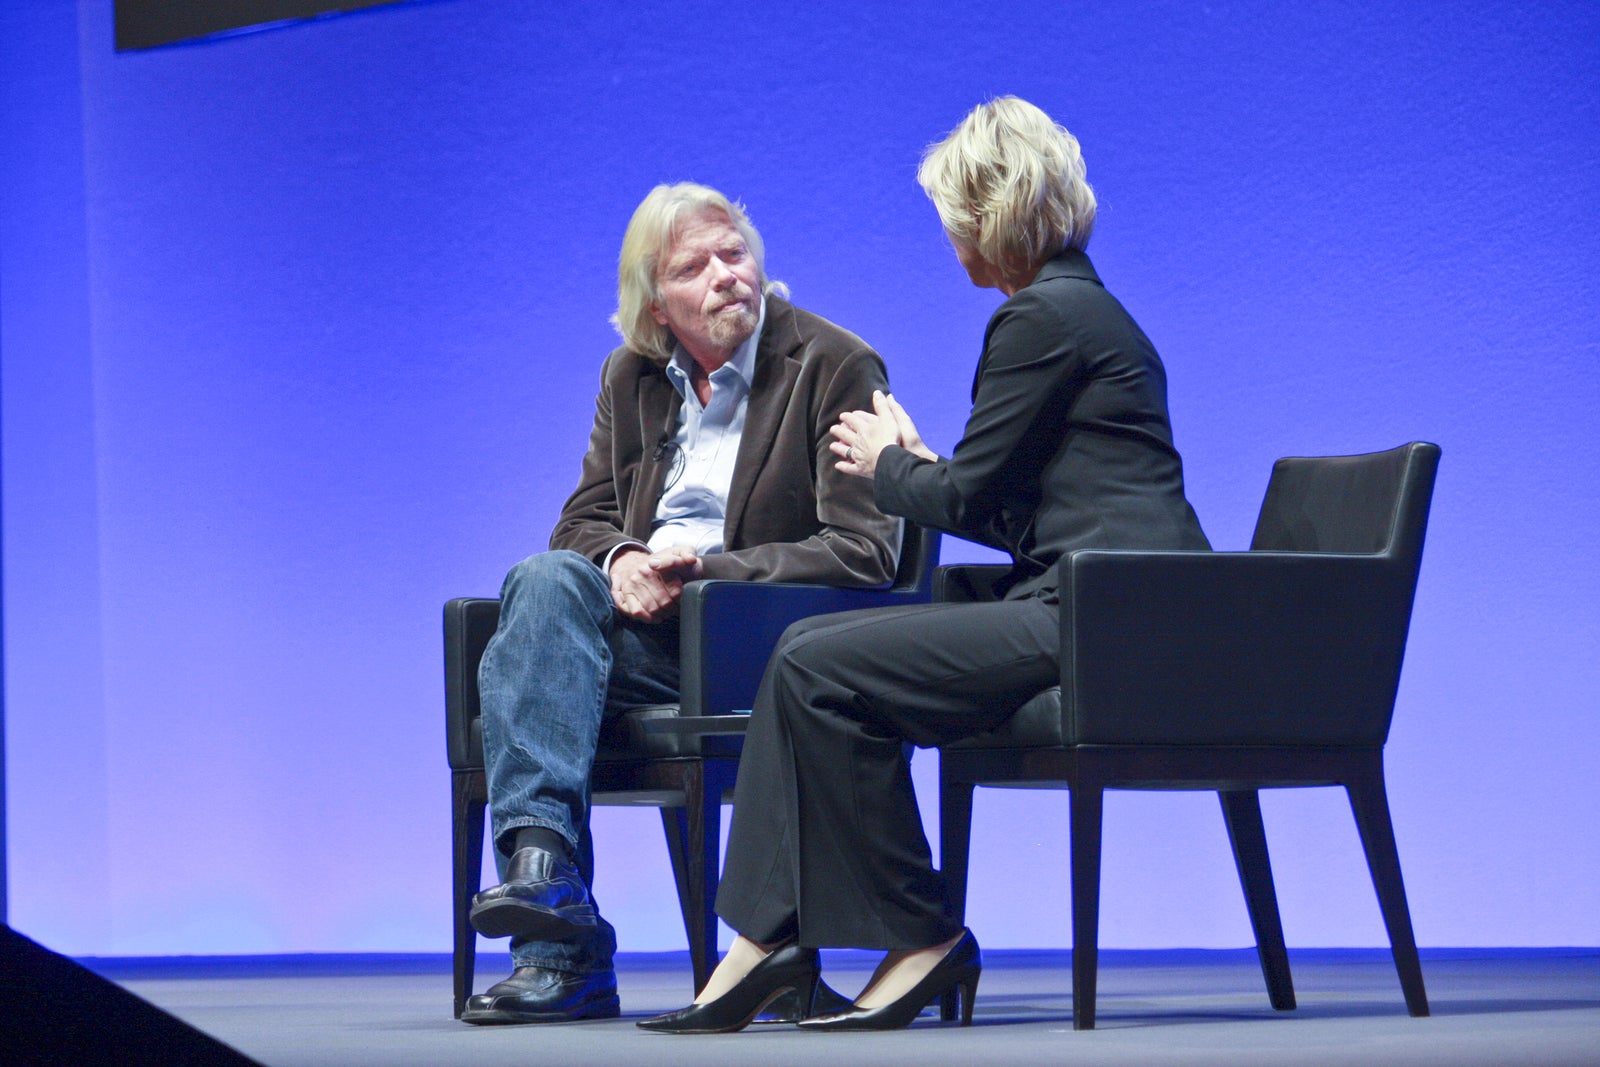 FRANKFURT GERMANY - MAY 17: Richard Branson Founder and President of Virgin Group answering to SAP moderator in his keynote at SAPPHIRE conference of SAP company MAY 17 2010
** Note: Slight graininess, best at smaller sizes